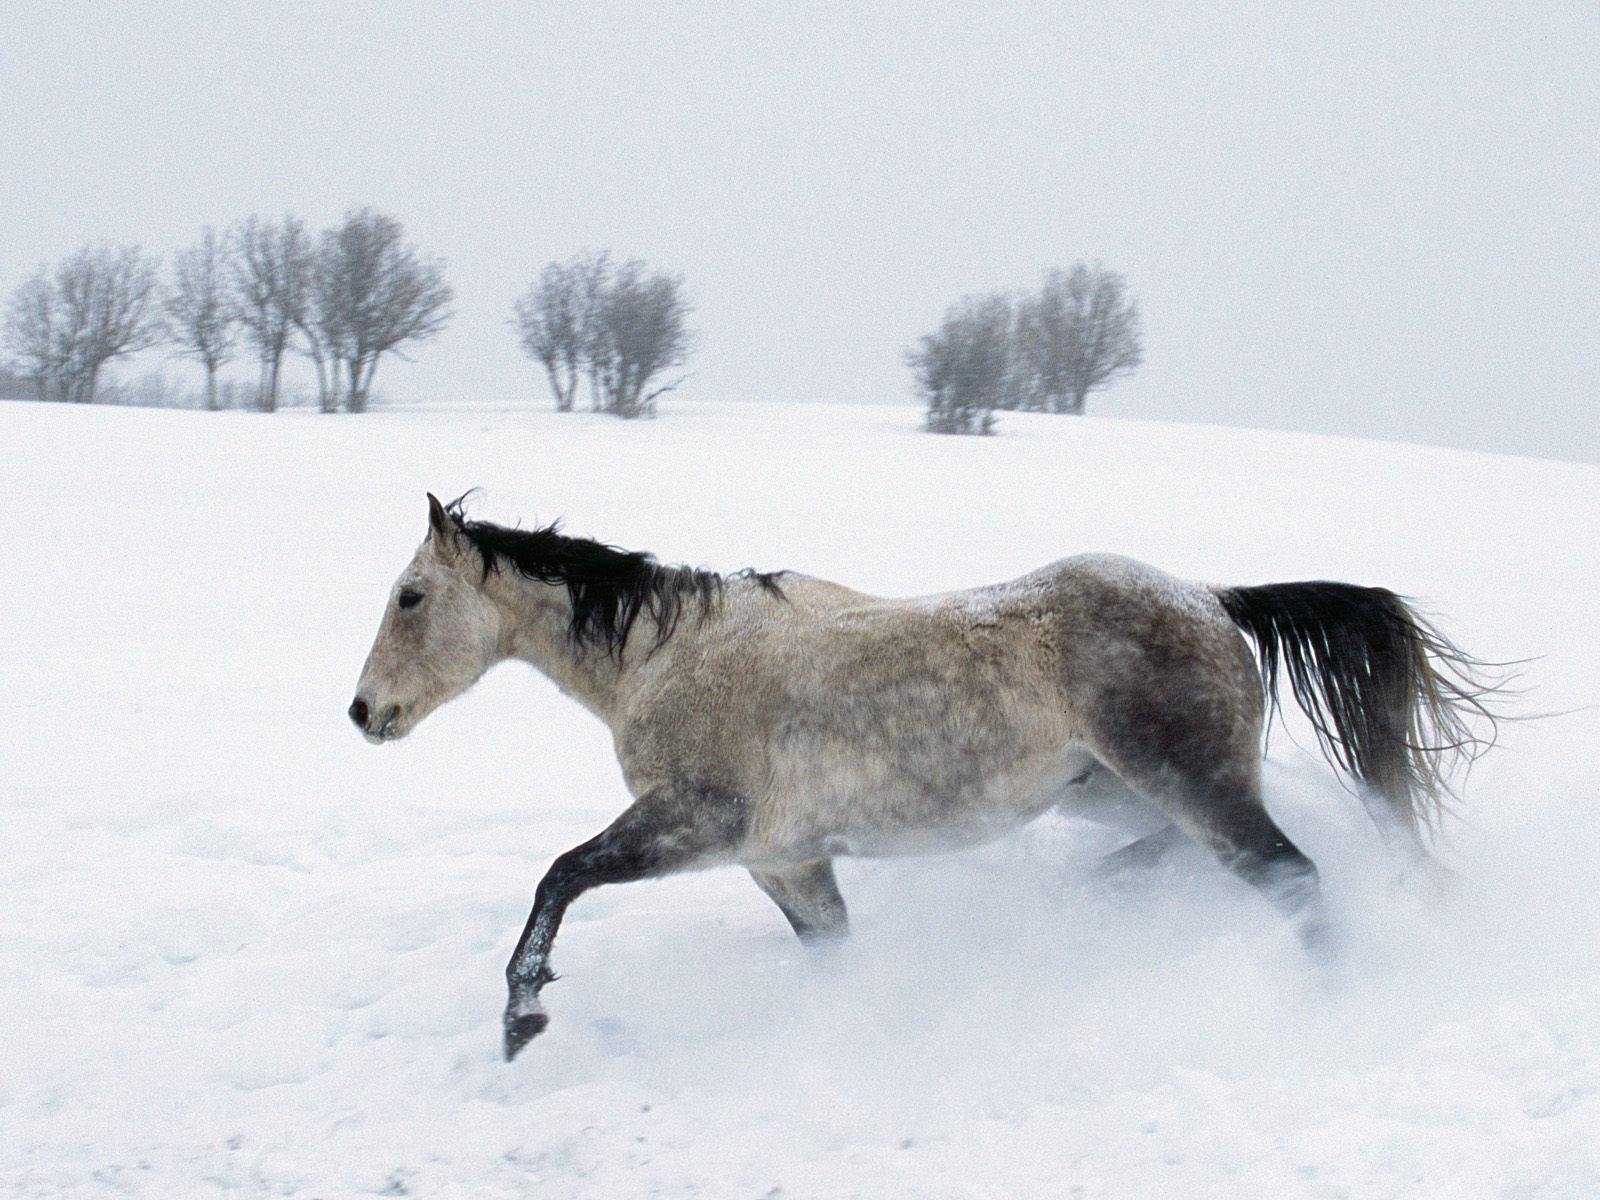 images of horses running through snow